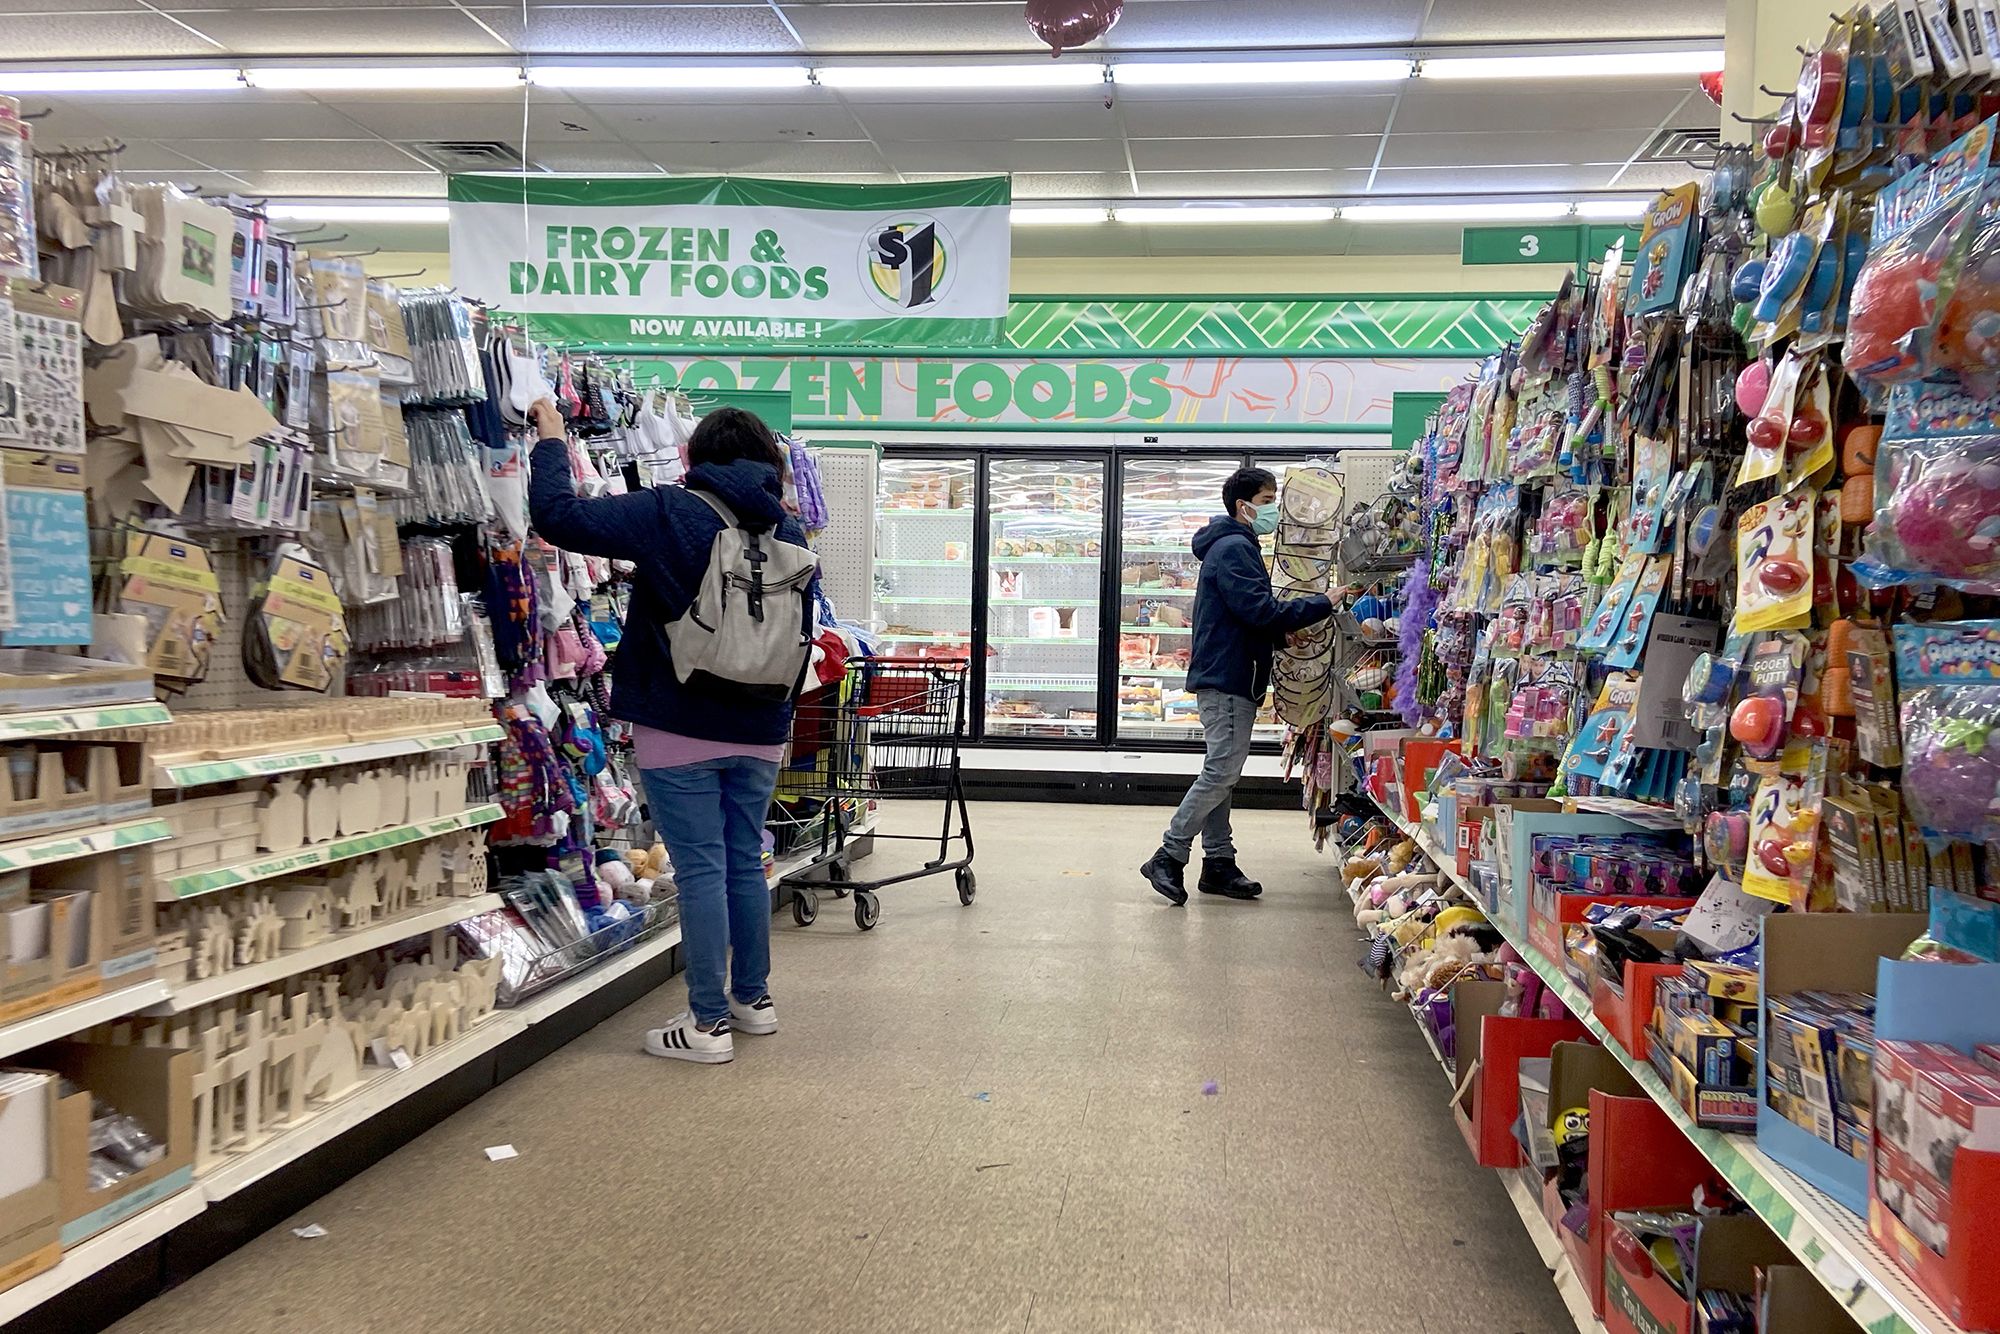 Some Dollar Tree items will now cost more than a dollar